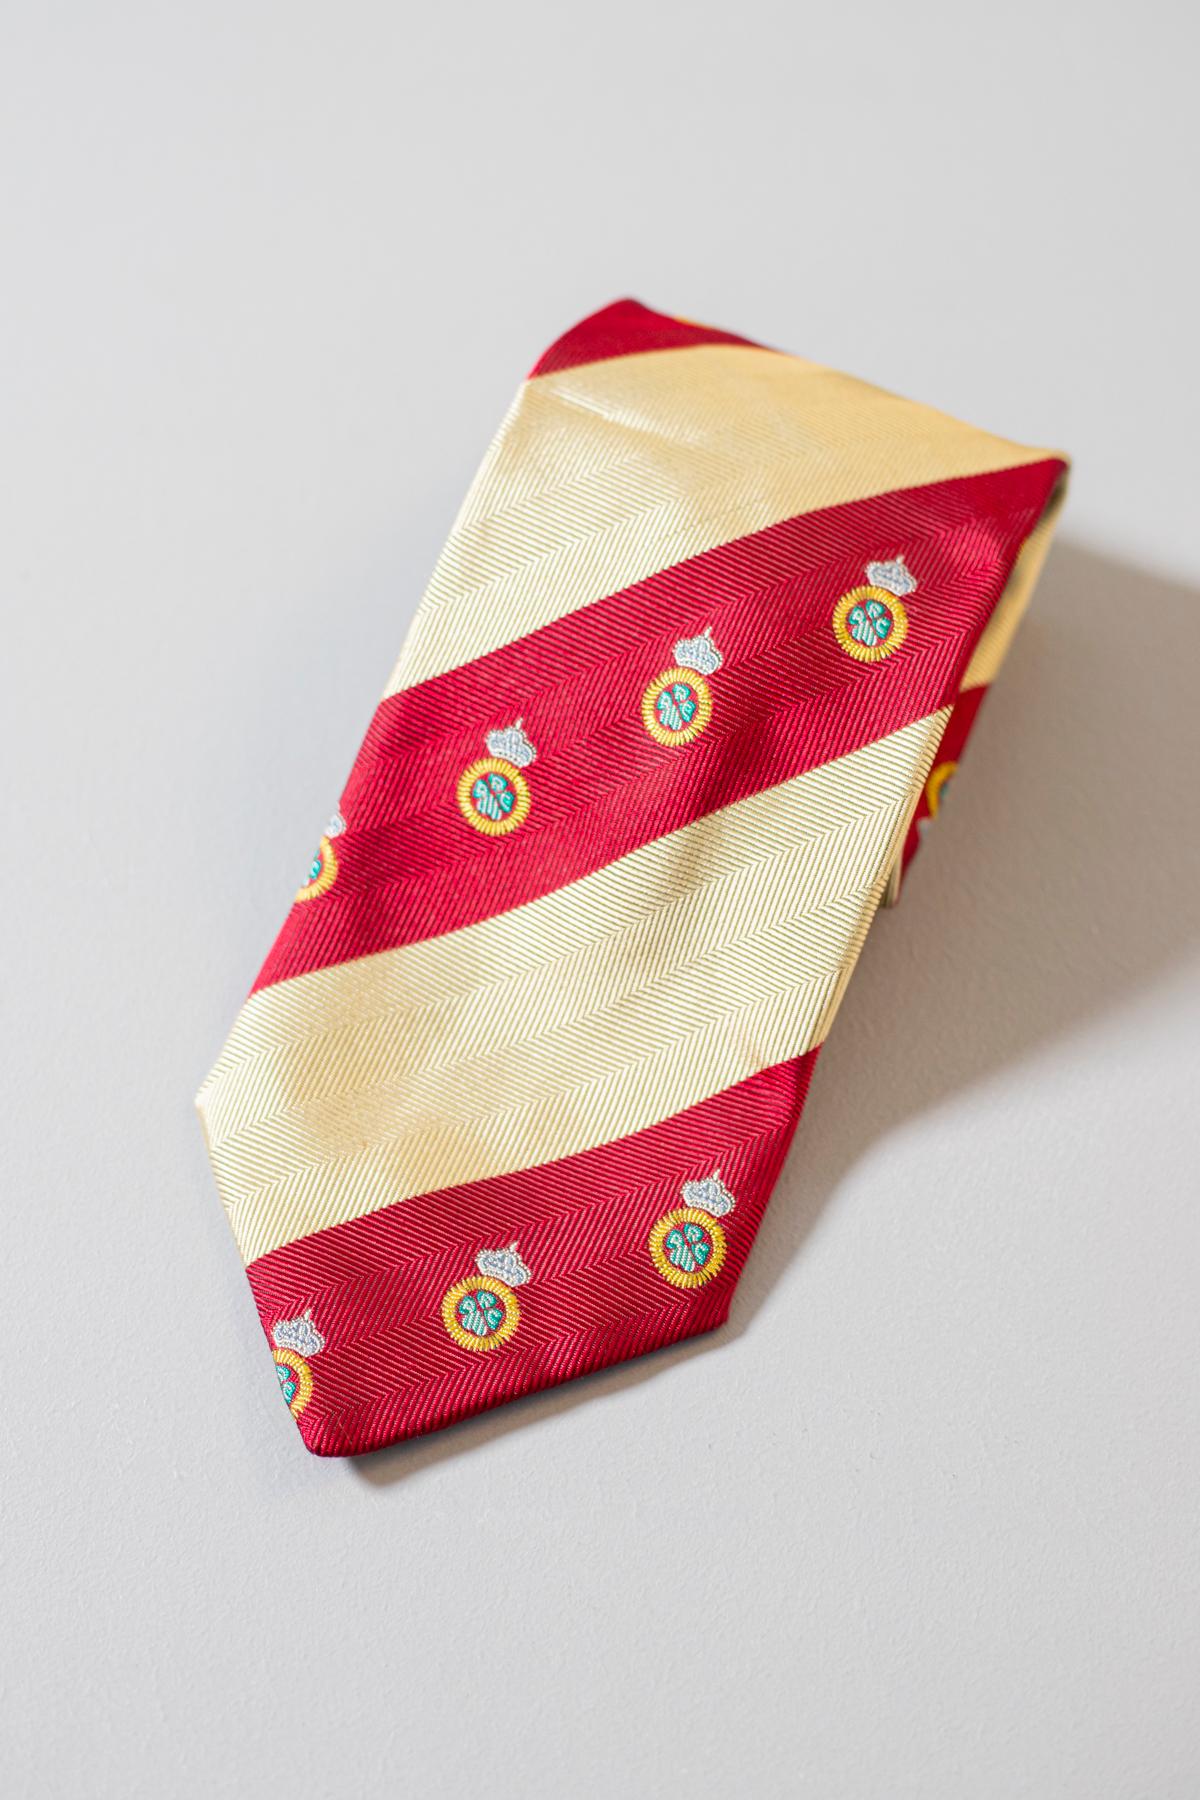 Domenico Basile designed this tie for his Modus Collection. This vintage all silk tie is decorated with red and yellow stripes, and with small medals. This tie is regal and elegant, which make it perfect for a formal event.